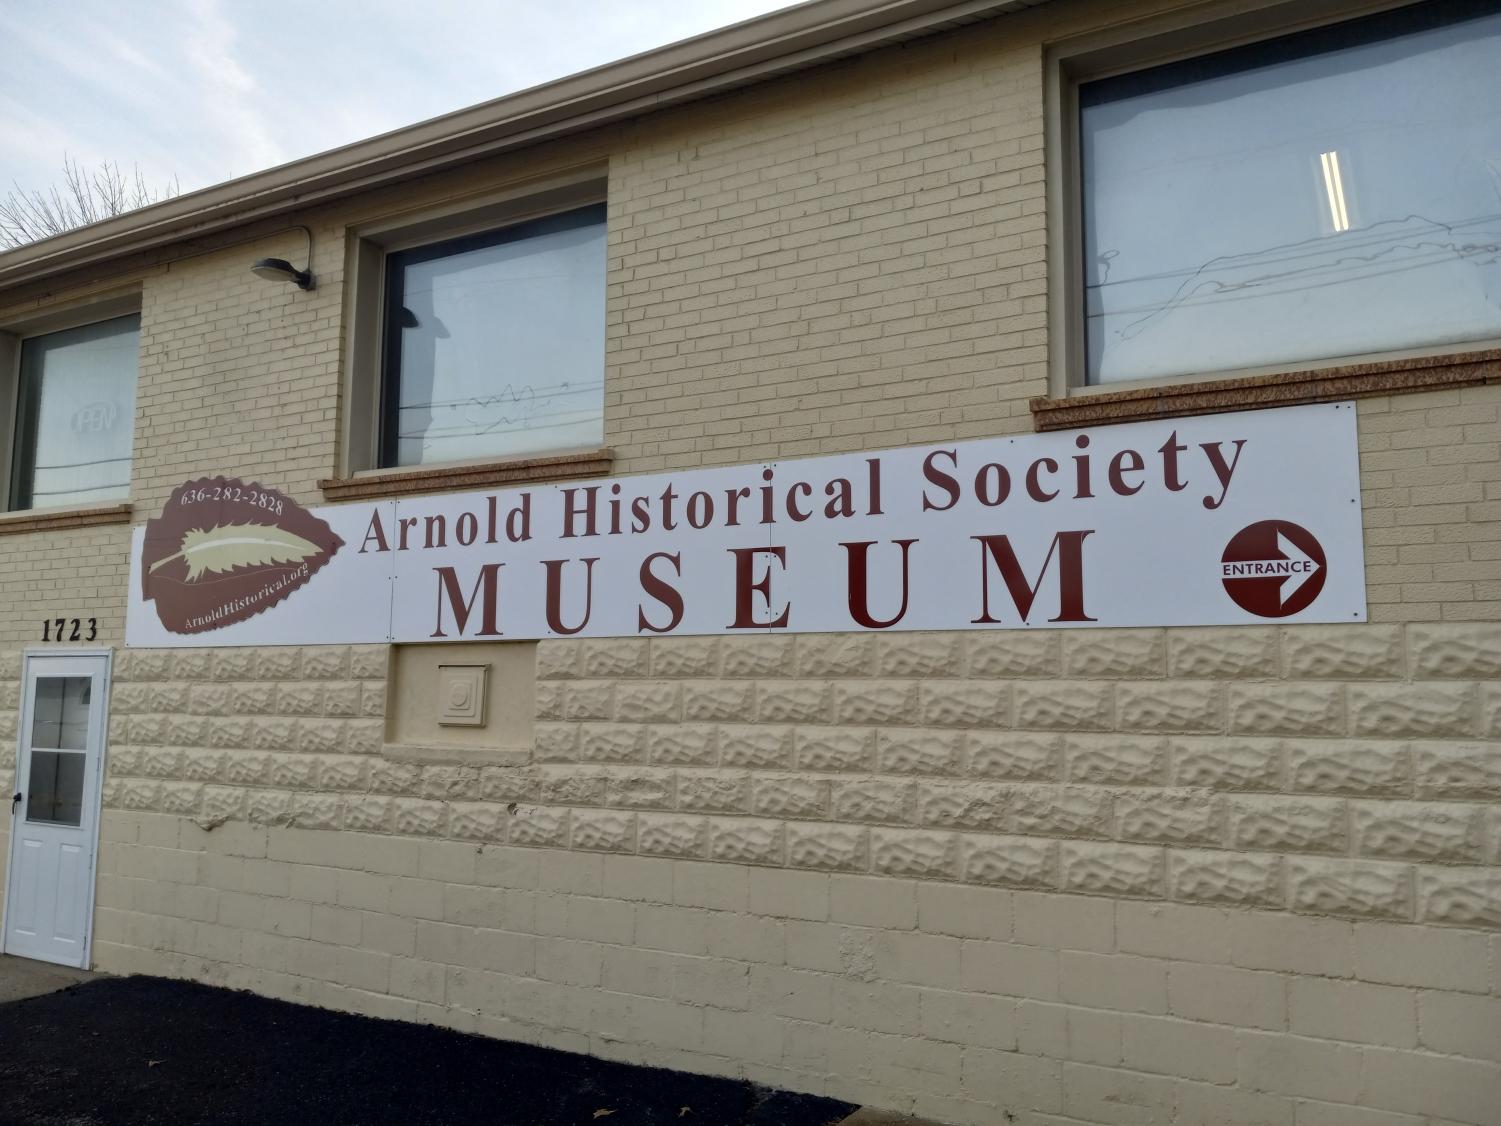 Outside the Arnold Historical Museum (1723 Jeffco Blvd, Arnold, MO 63010